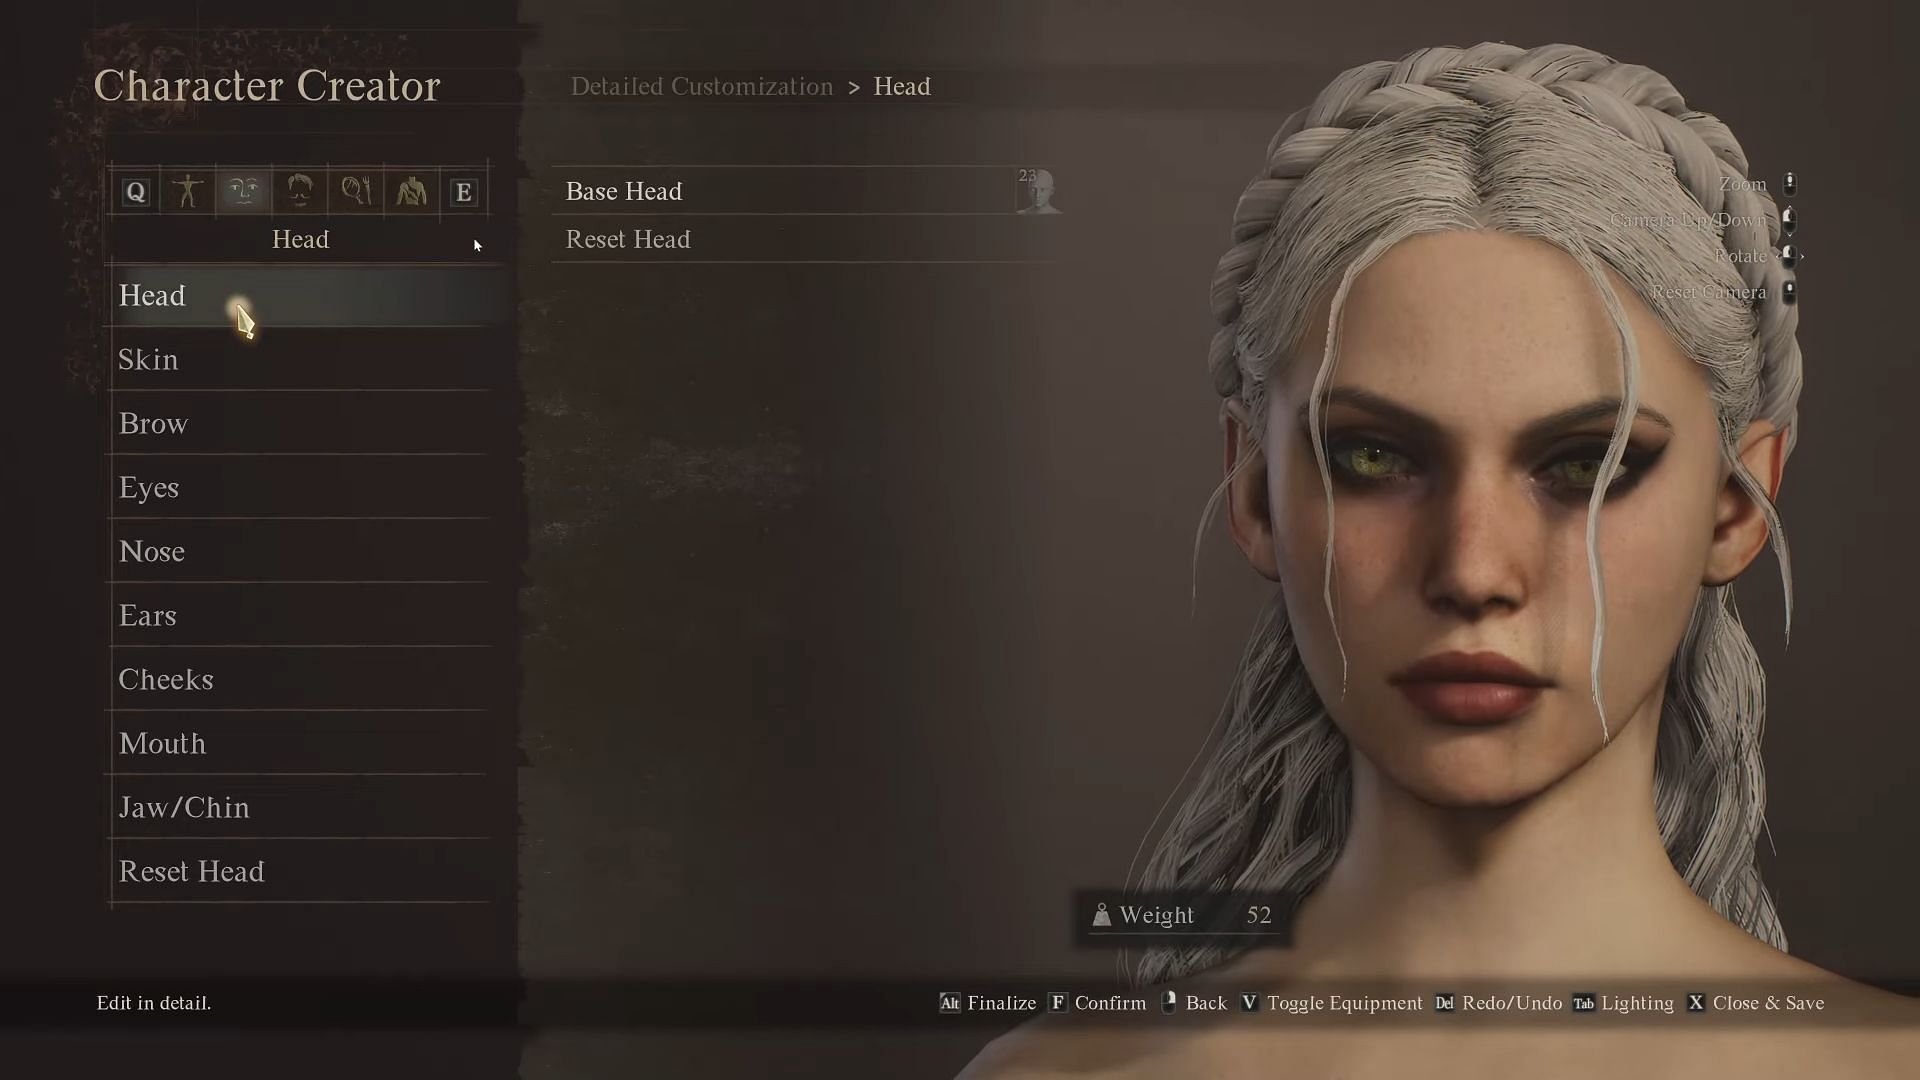 A one-time access to the character creator is unfortunate. (Image via YouTube/SmittenHeart)